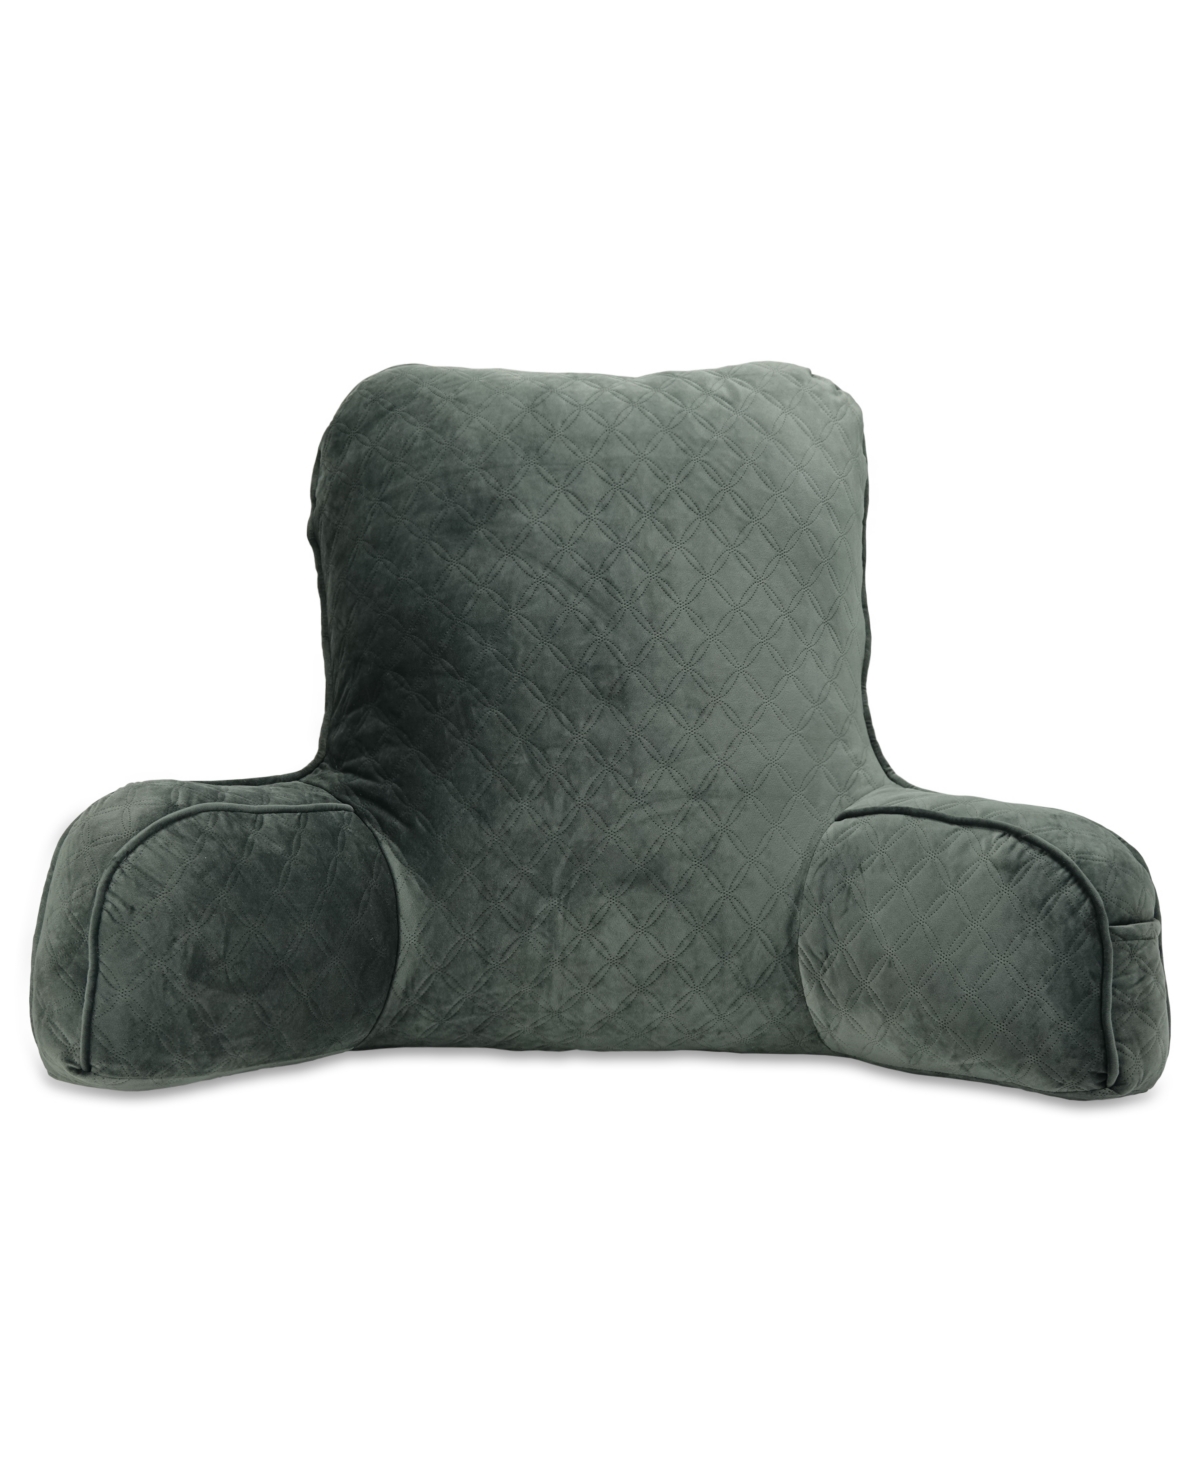 Arlee Home Fashions Every Bed Rest Lounger Pillow, 32" X 17" In Gunmetal